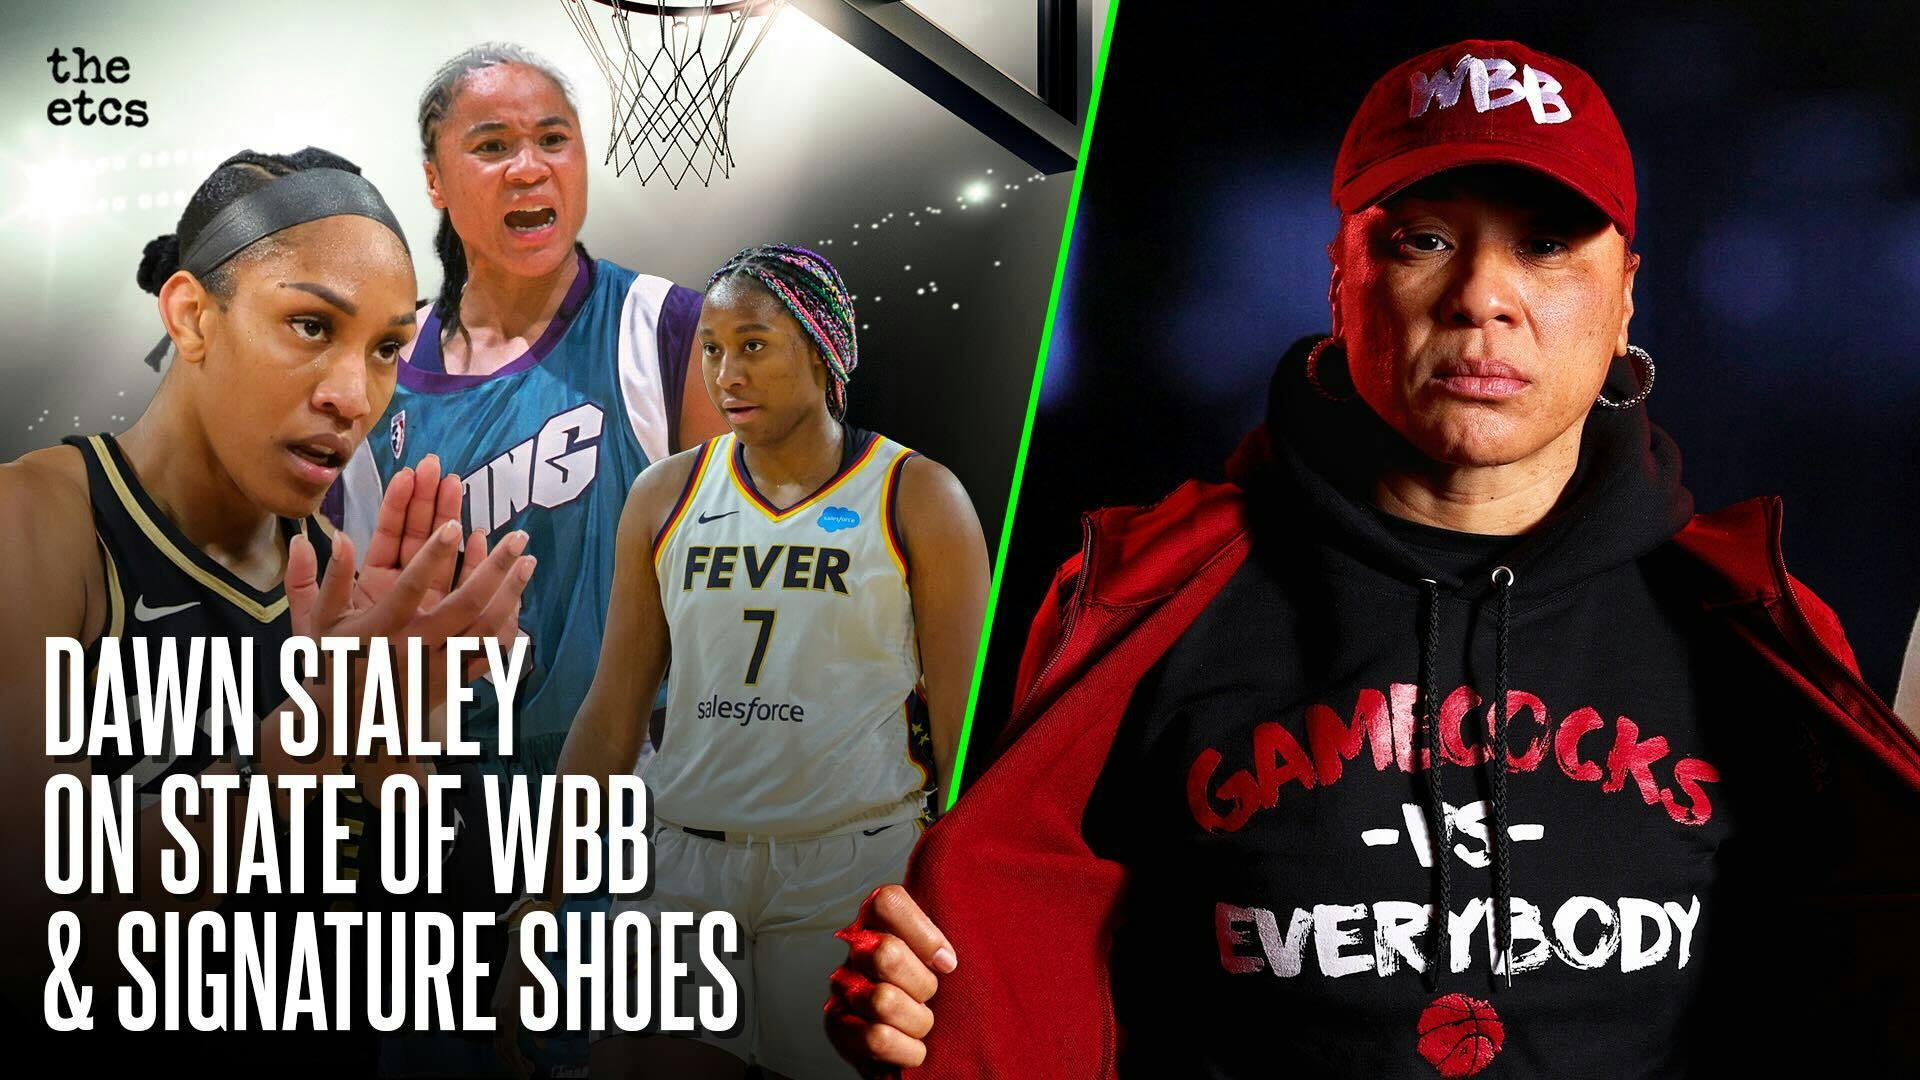 Legend Dawn Staley On State of Women's Basketball & Having Nike’s Best Signature Shoe | The ETCs